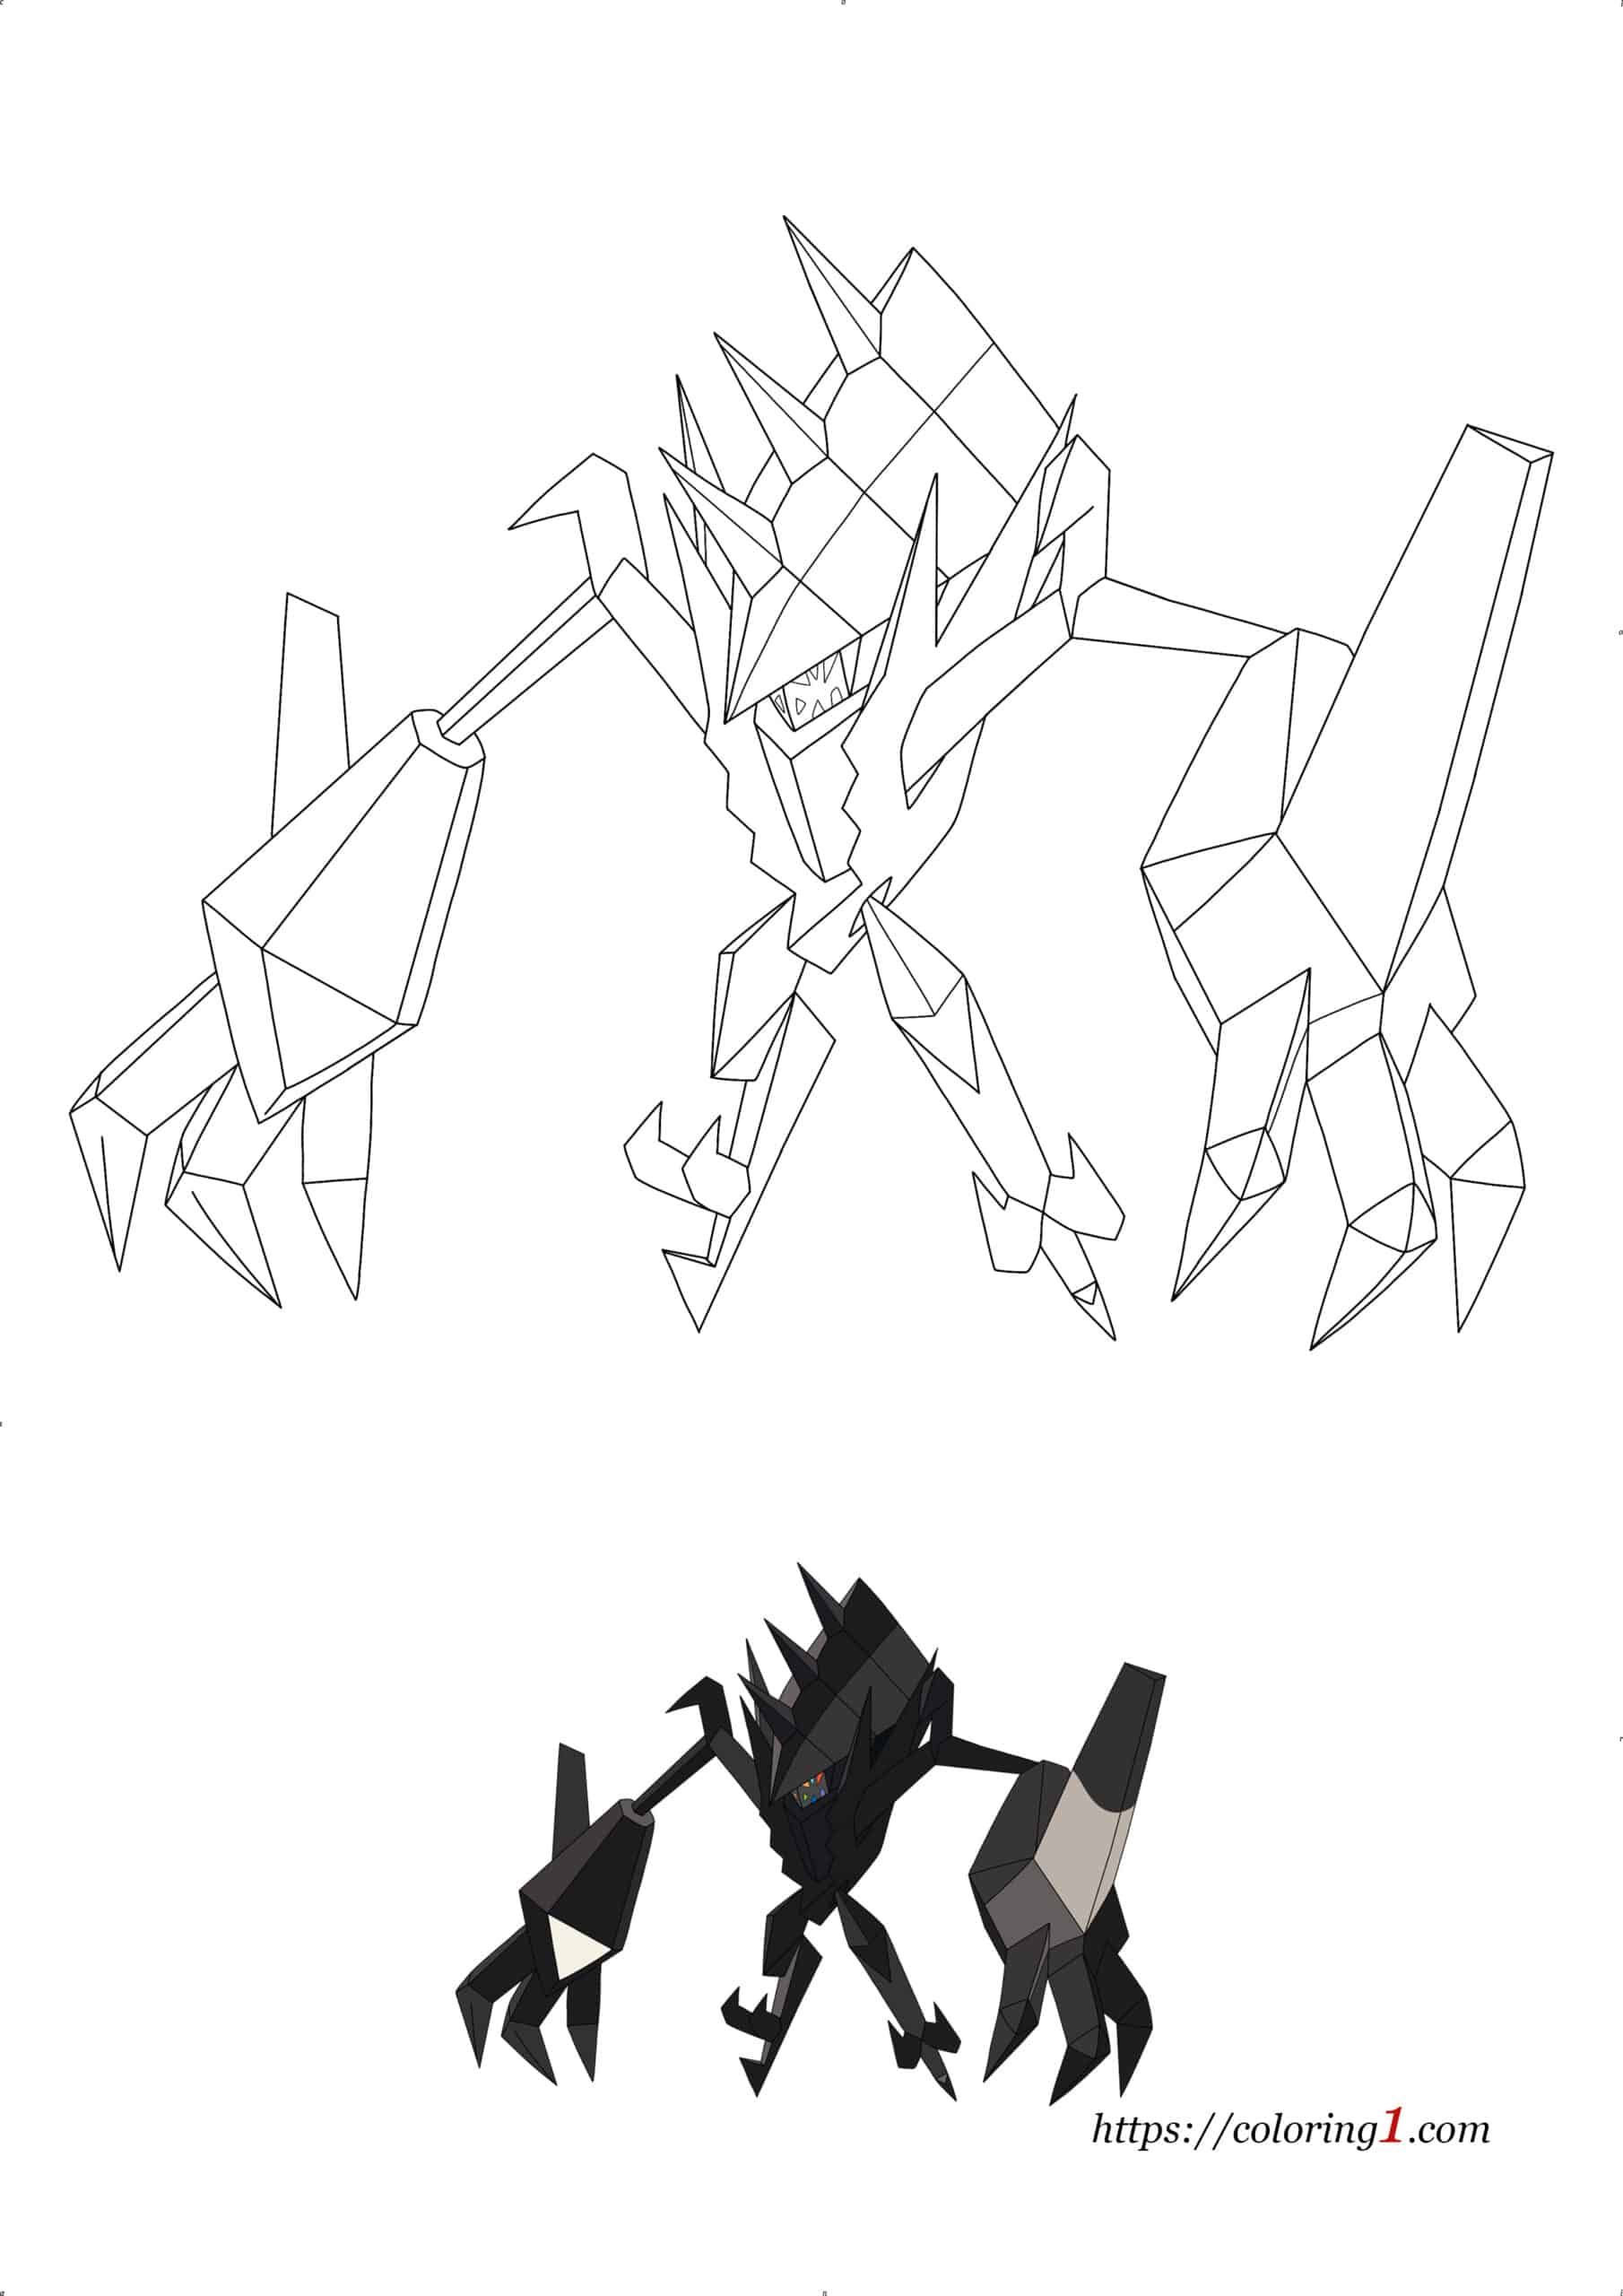 Pokemon Necrozma Coloring Pages - 2 Free Coloring Sheets (2021) | Pokemon coloring  pages, Pokemon coloring sheets, Coloring pages